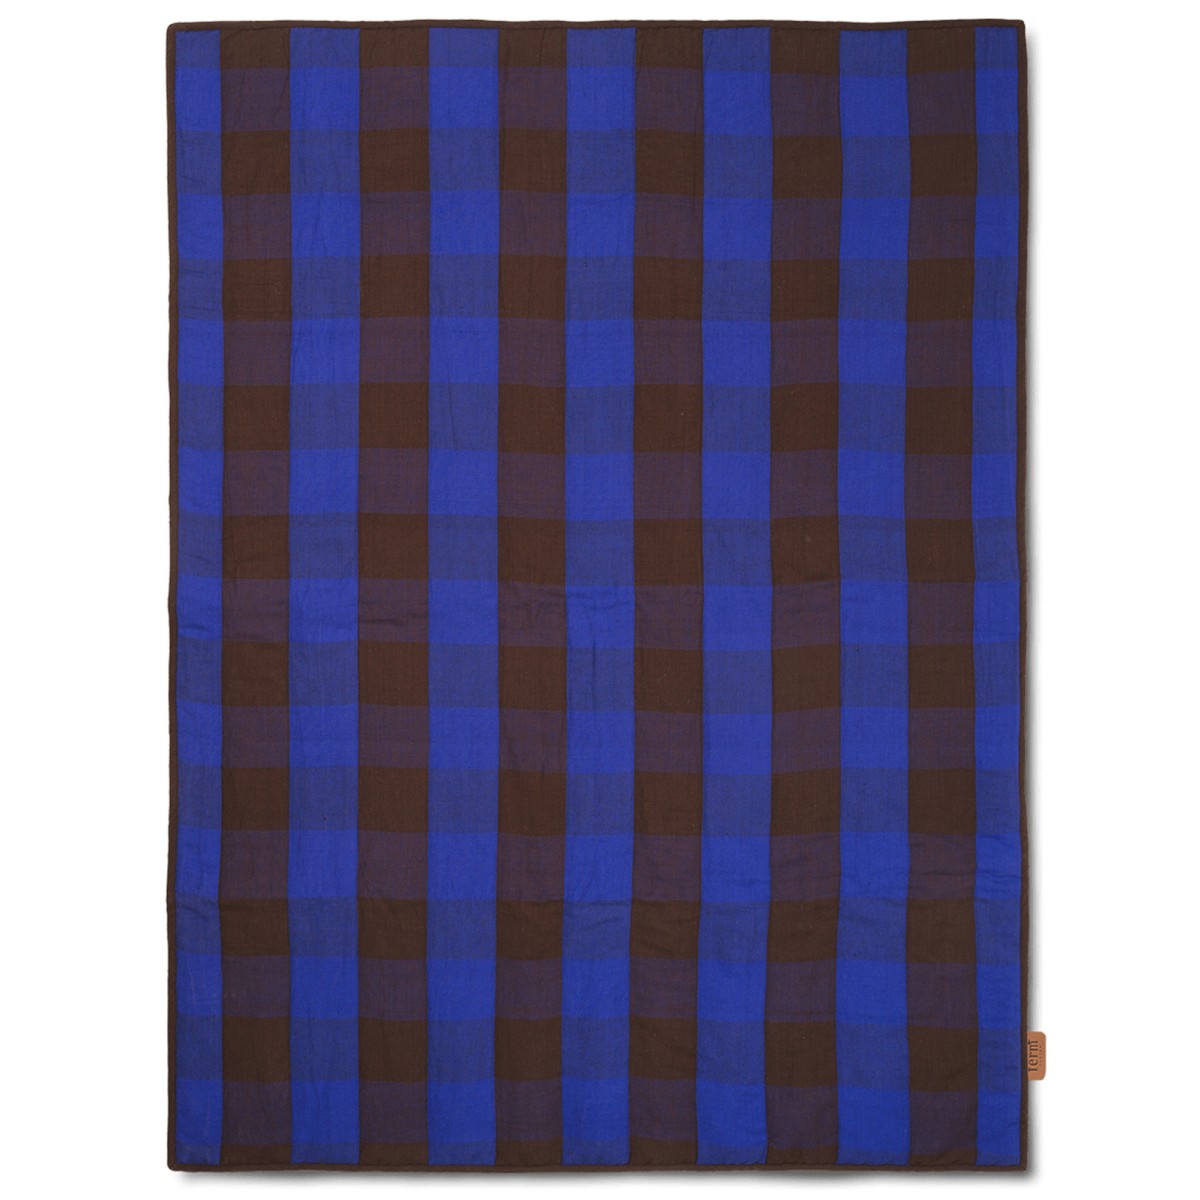 Grand quilted blanket - chocolate / bright blue